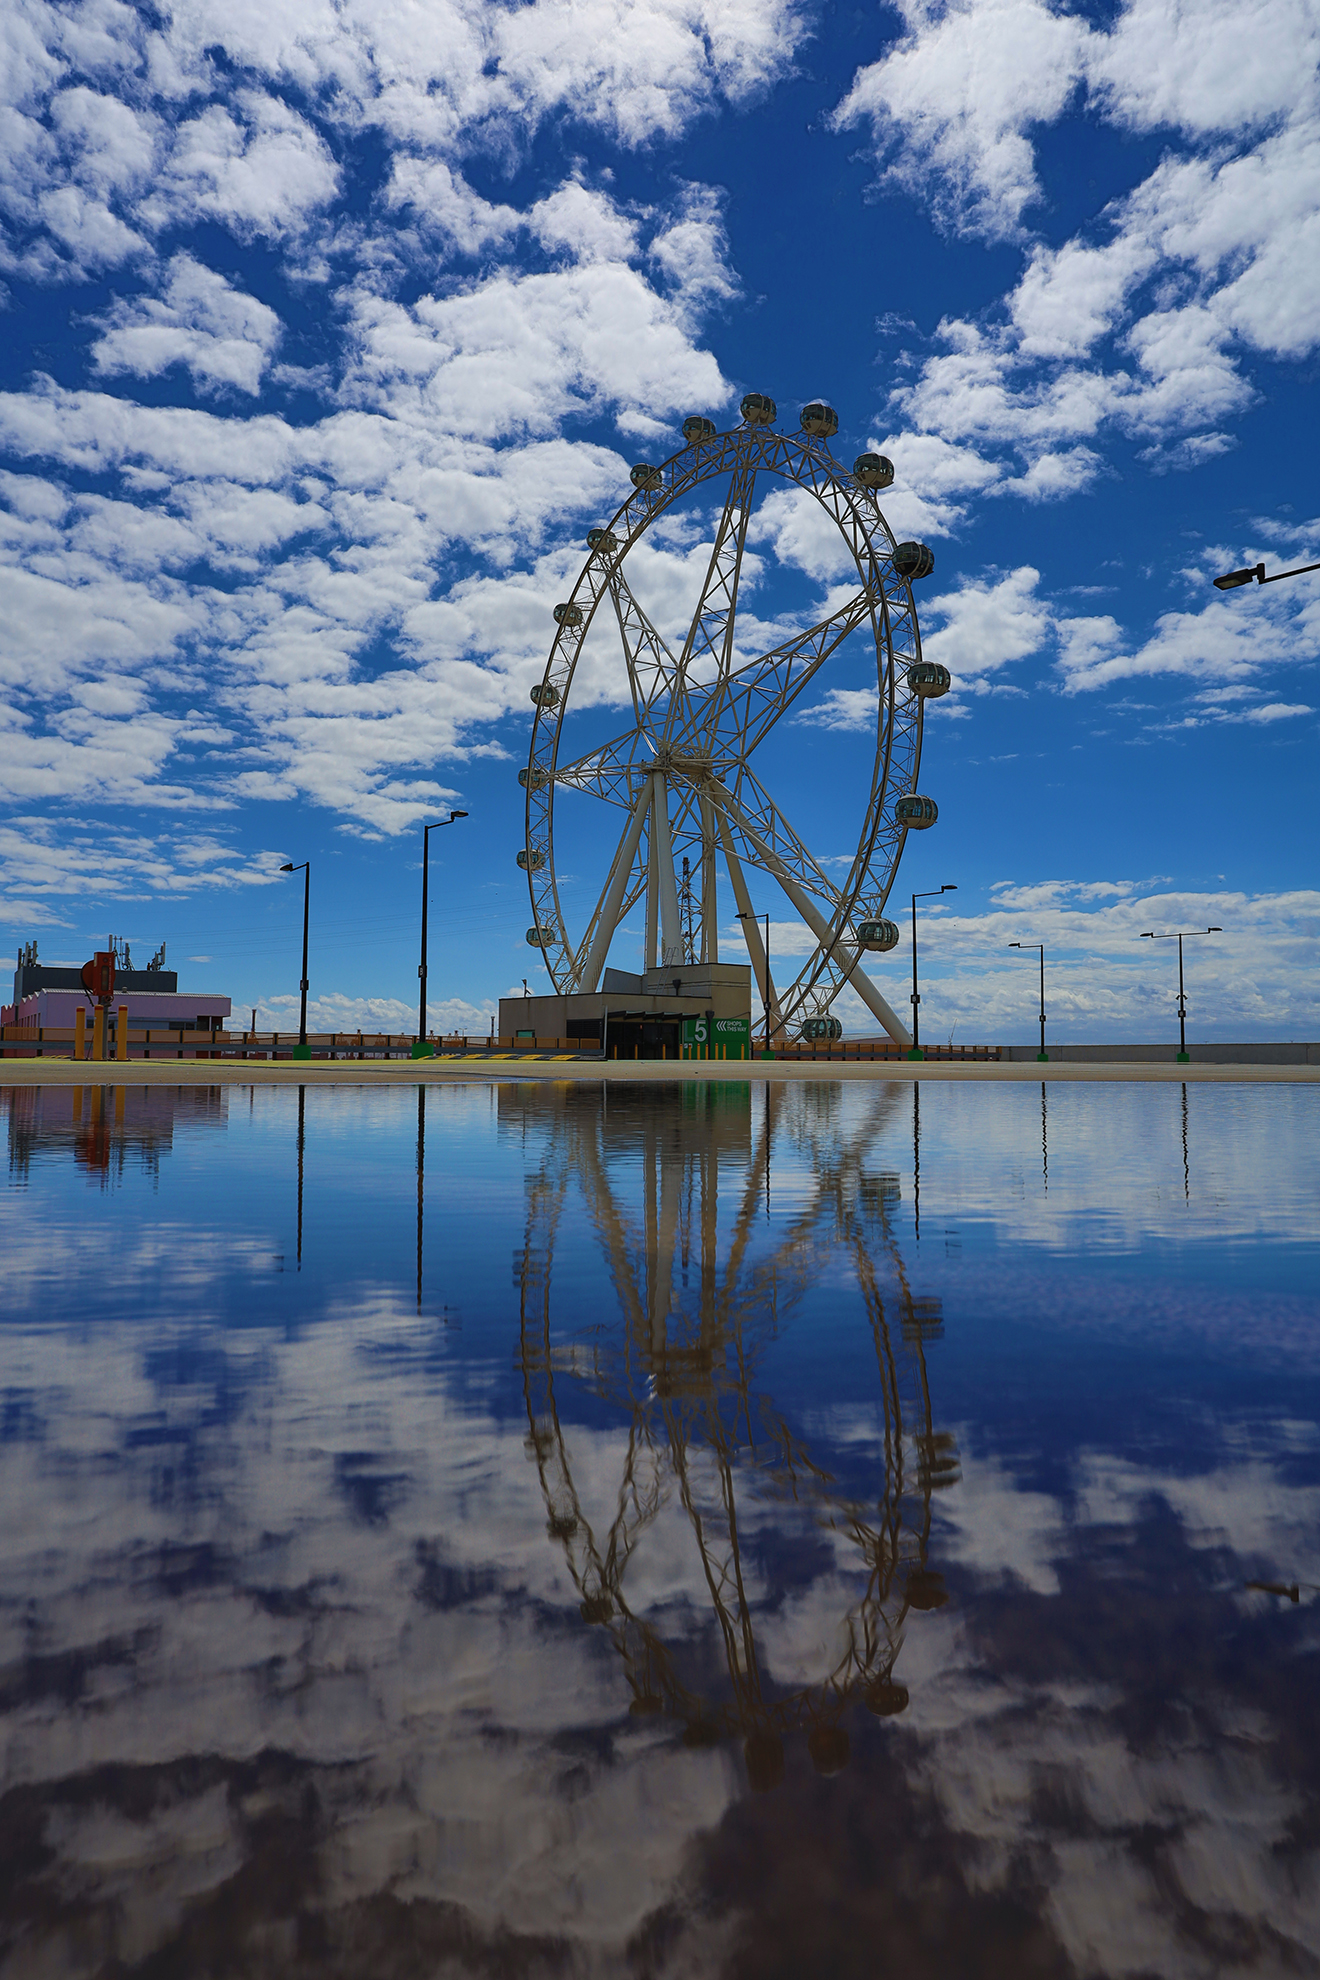 Image of a large ferris wheel image surrounded by a blue sky with white fluffy clouds